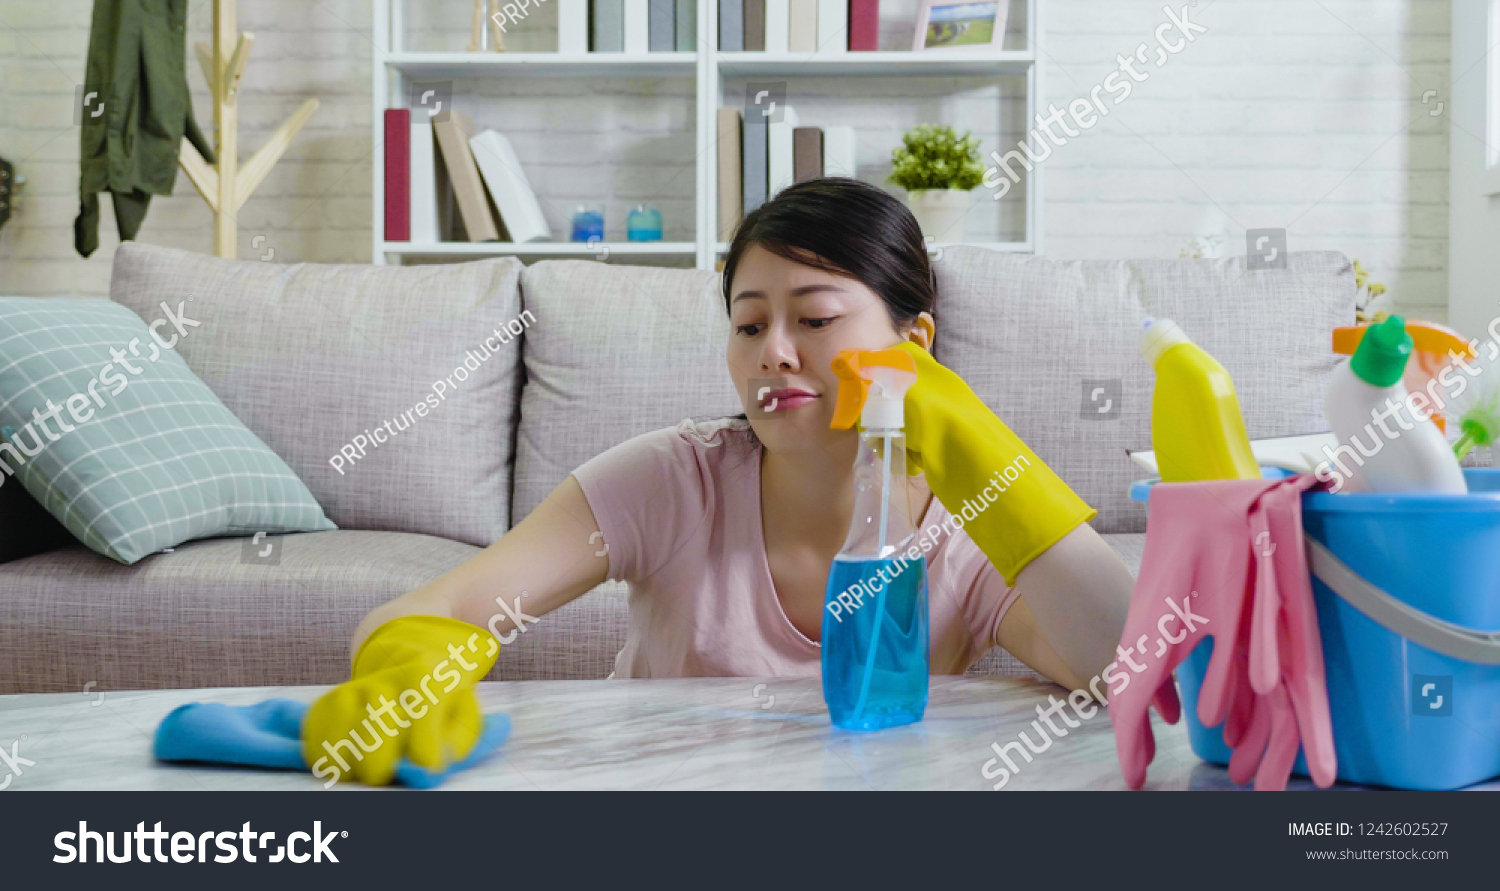 asian housewife unhappy doing home chores with hands putting under the chin while wiping the table sitting on the floor in a cozy room indoors. lady in protective gloves with unsatisfied face. #1242602527